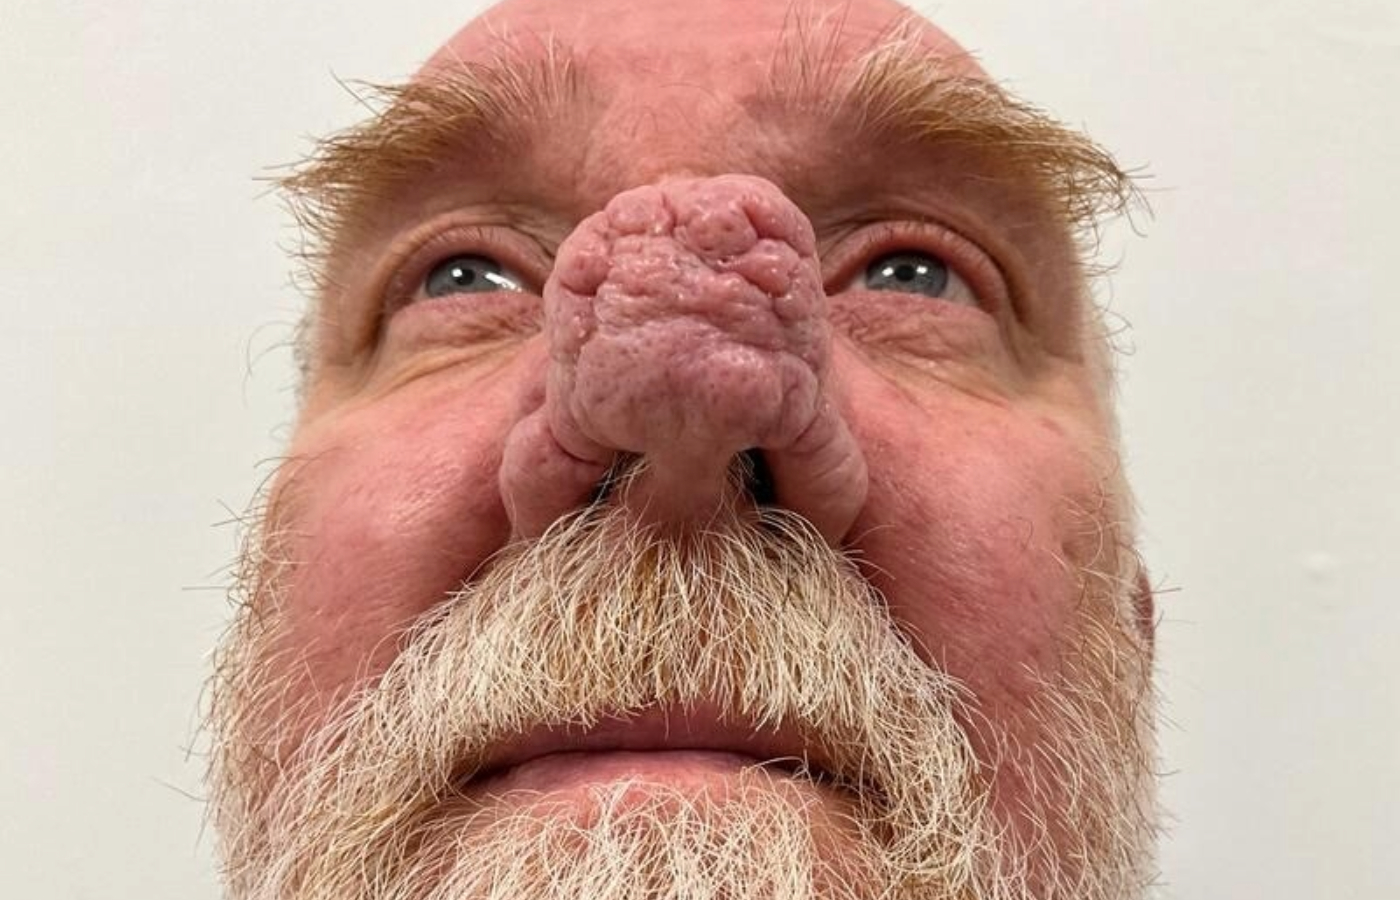 Ian Arthur turned reclusive after his rhinophyma worsened.